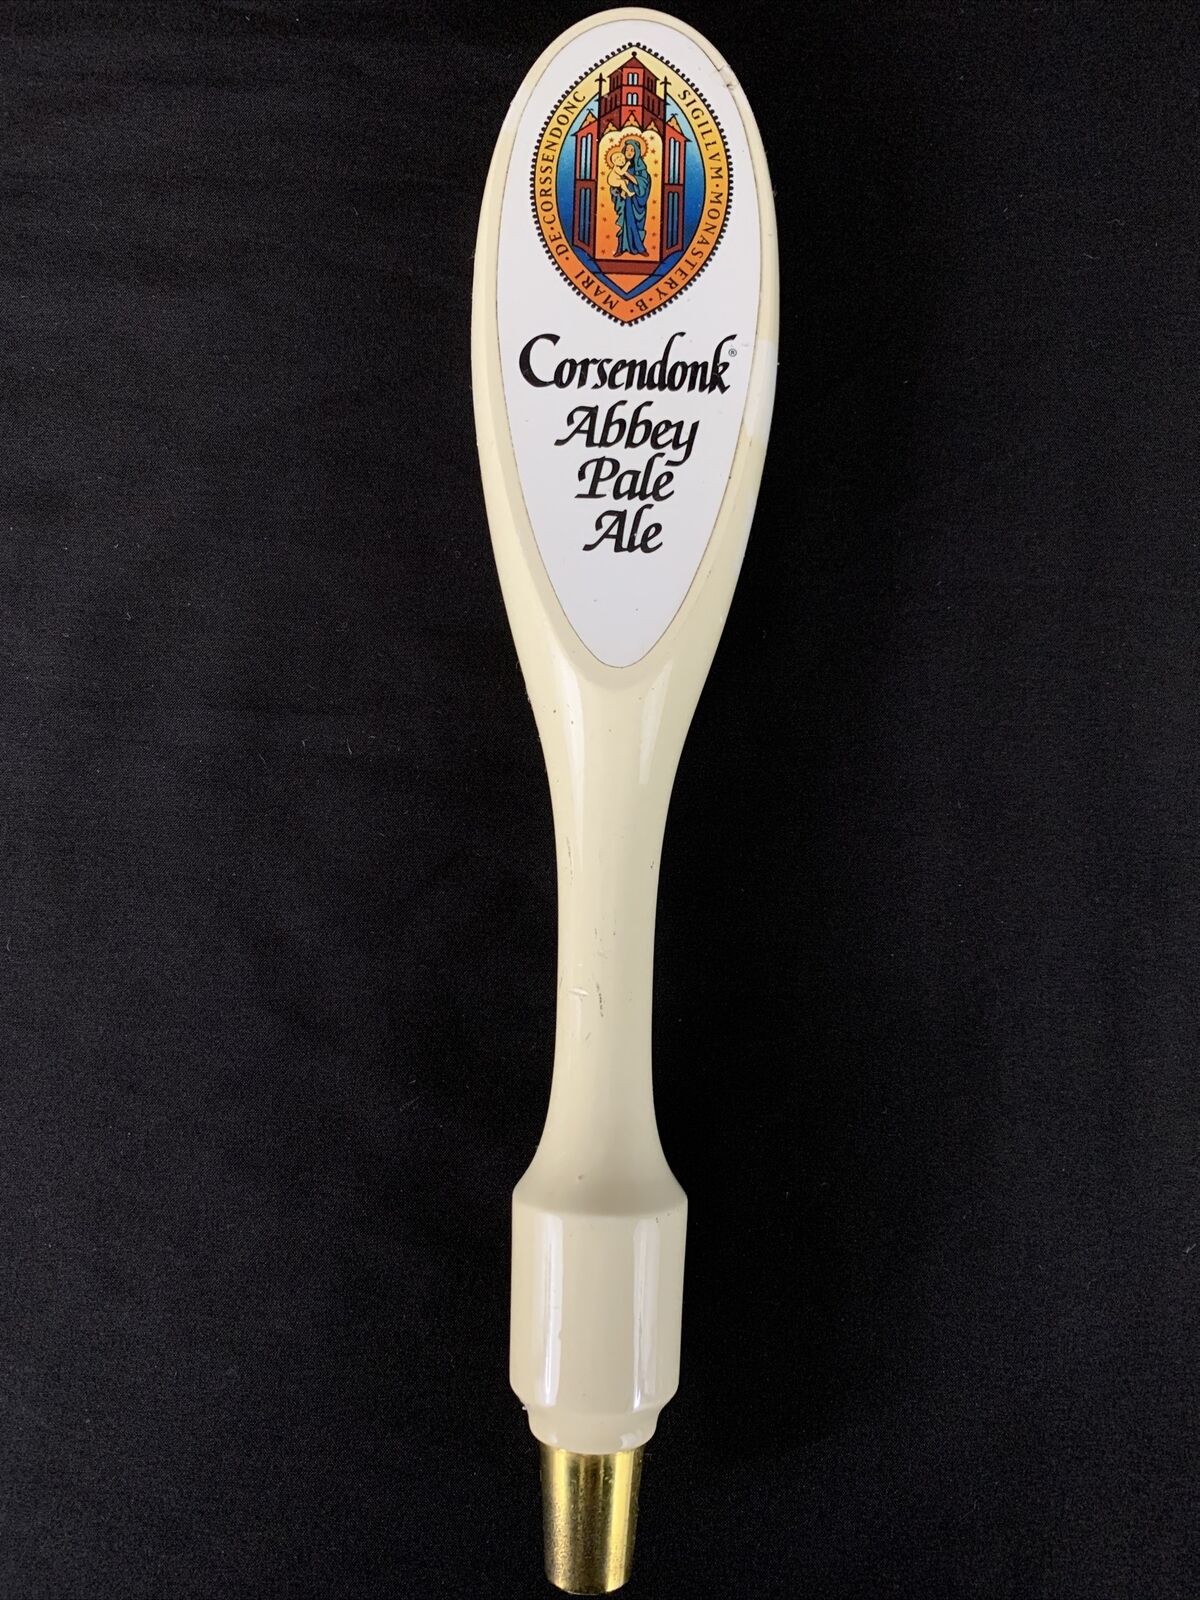 Corsendonk Abbey Pale Ale Mari Corssendonc Company Brewery Bar Beer Tap Handle